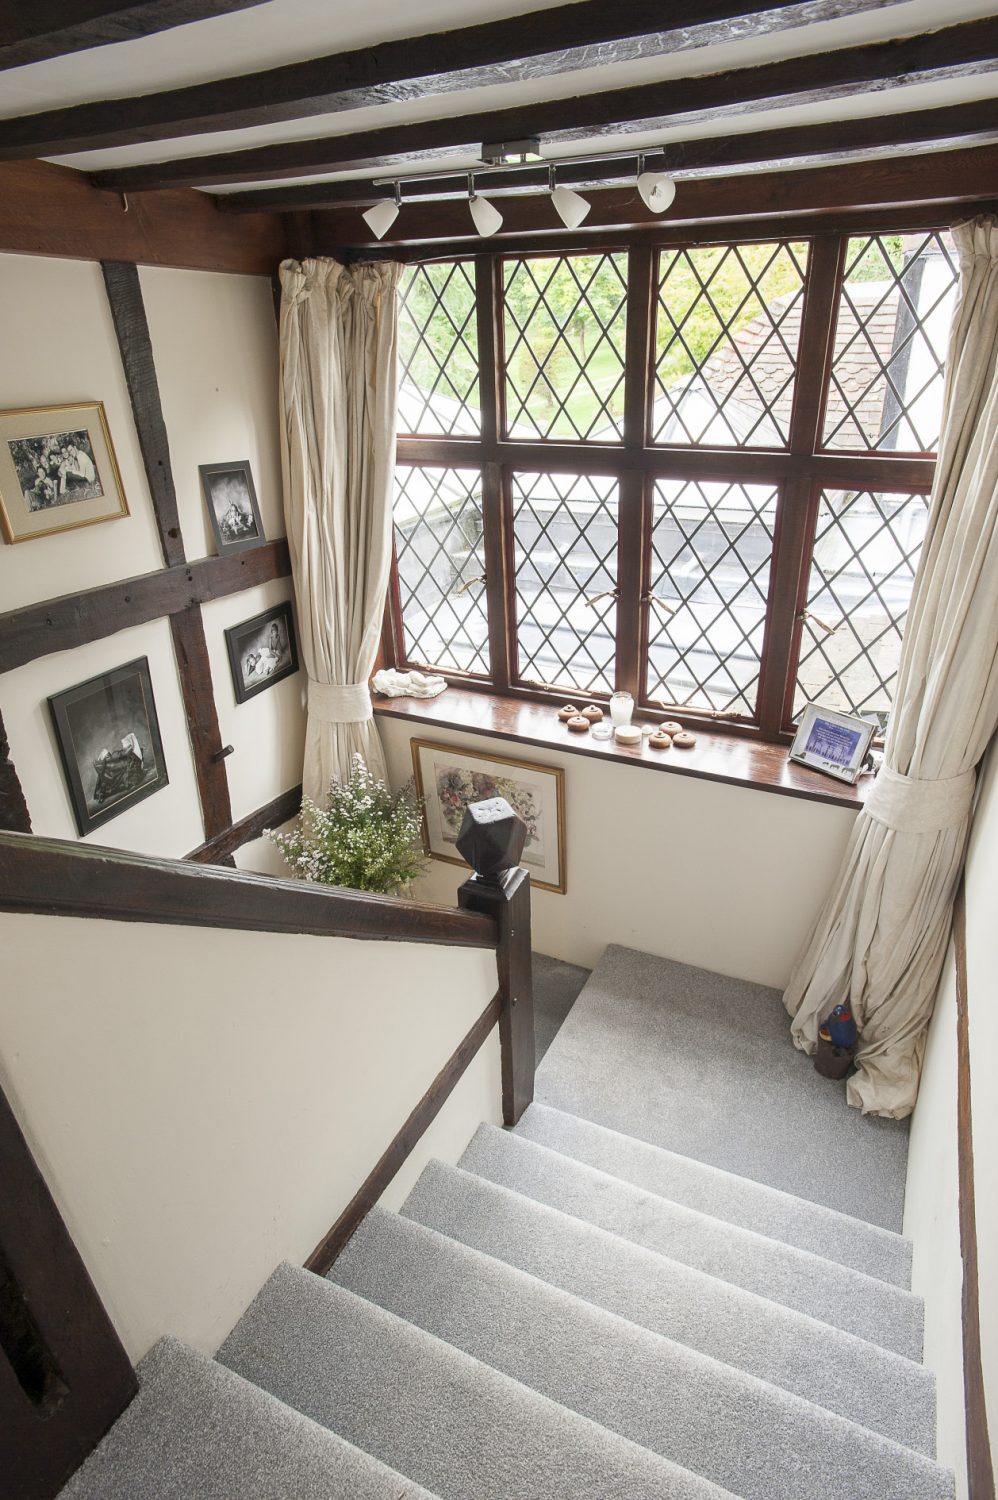 From the sitting room, stairs lead up to Pennybridge’s two further floors